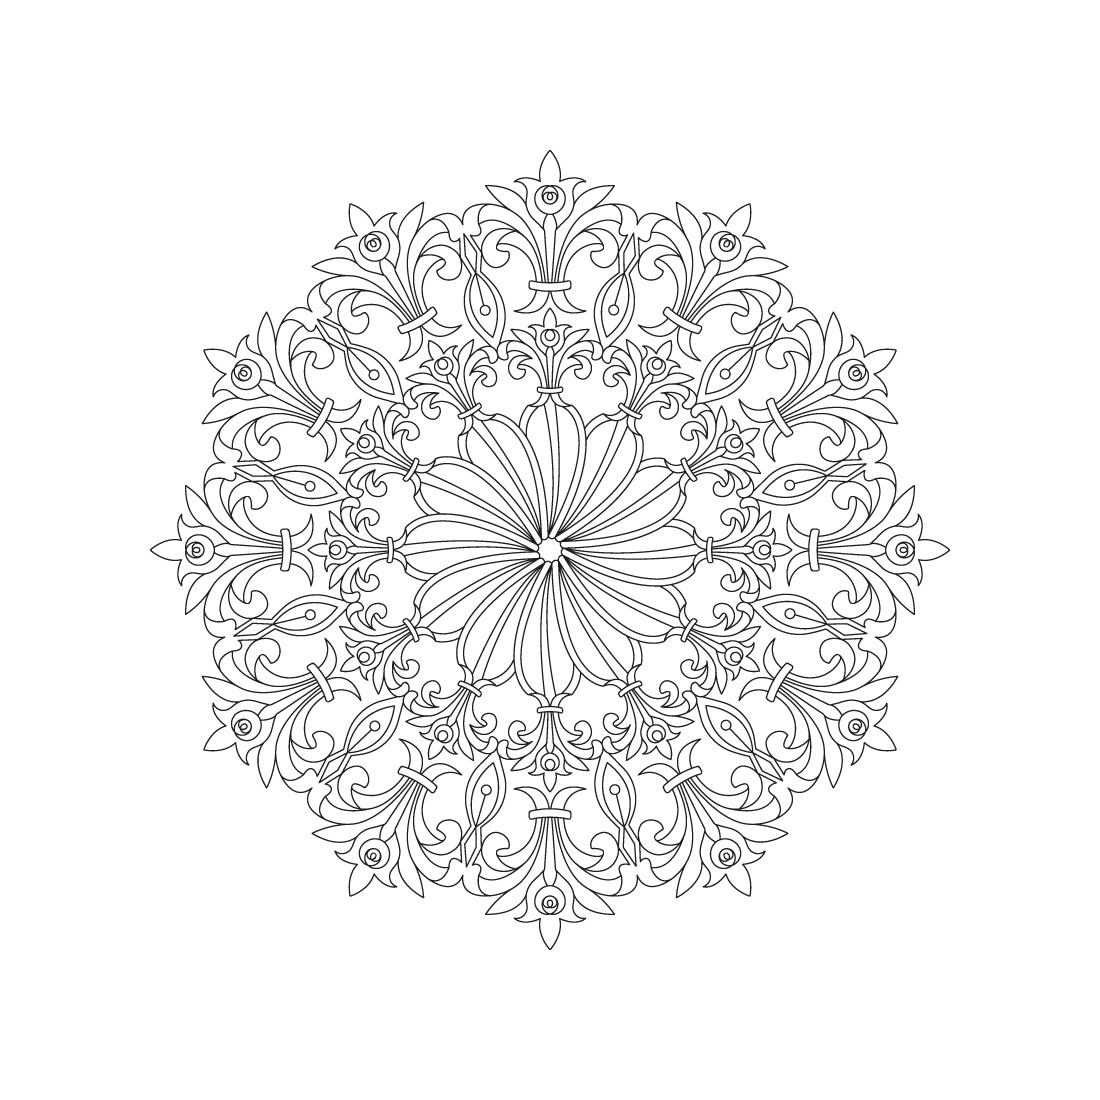 Bundle of 10 Inner Peace Mandala Coloring Book Pages preview image.